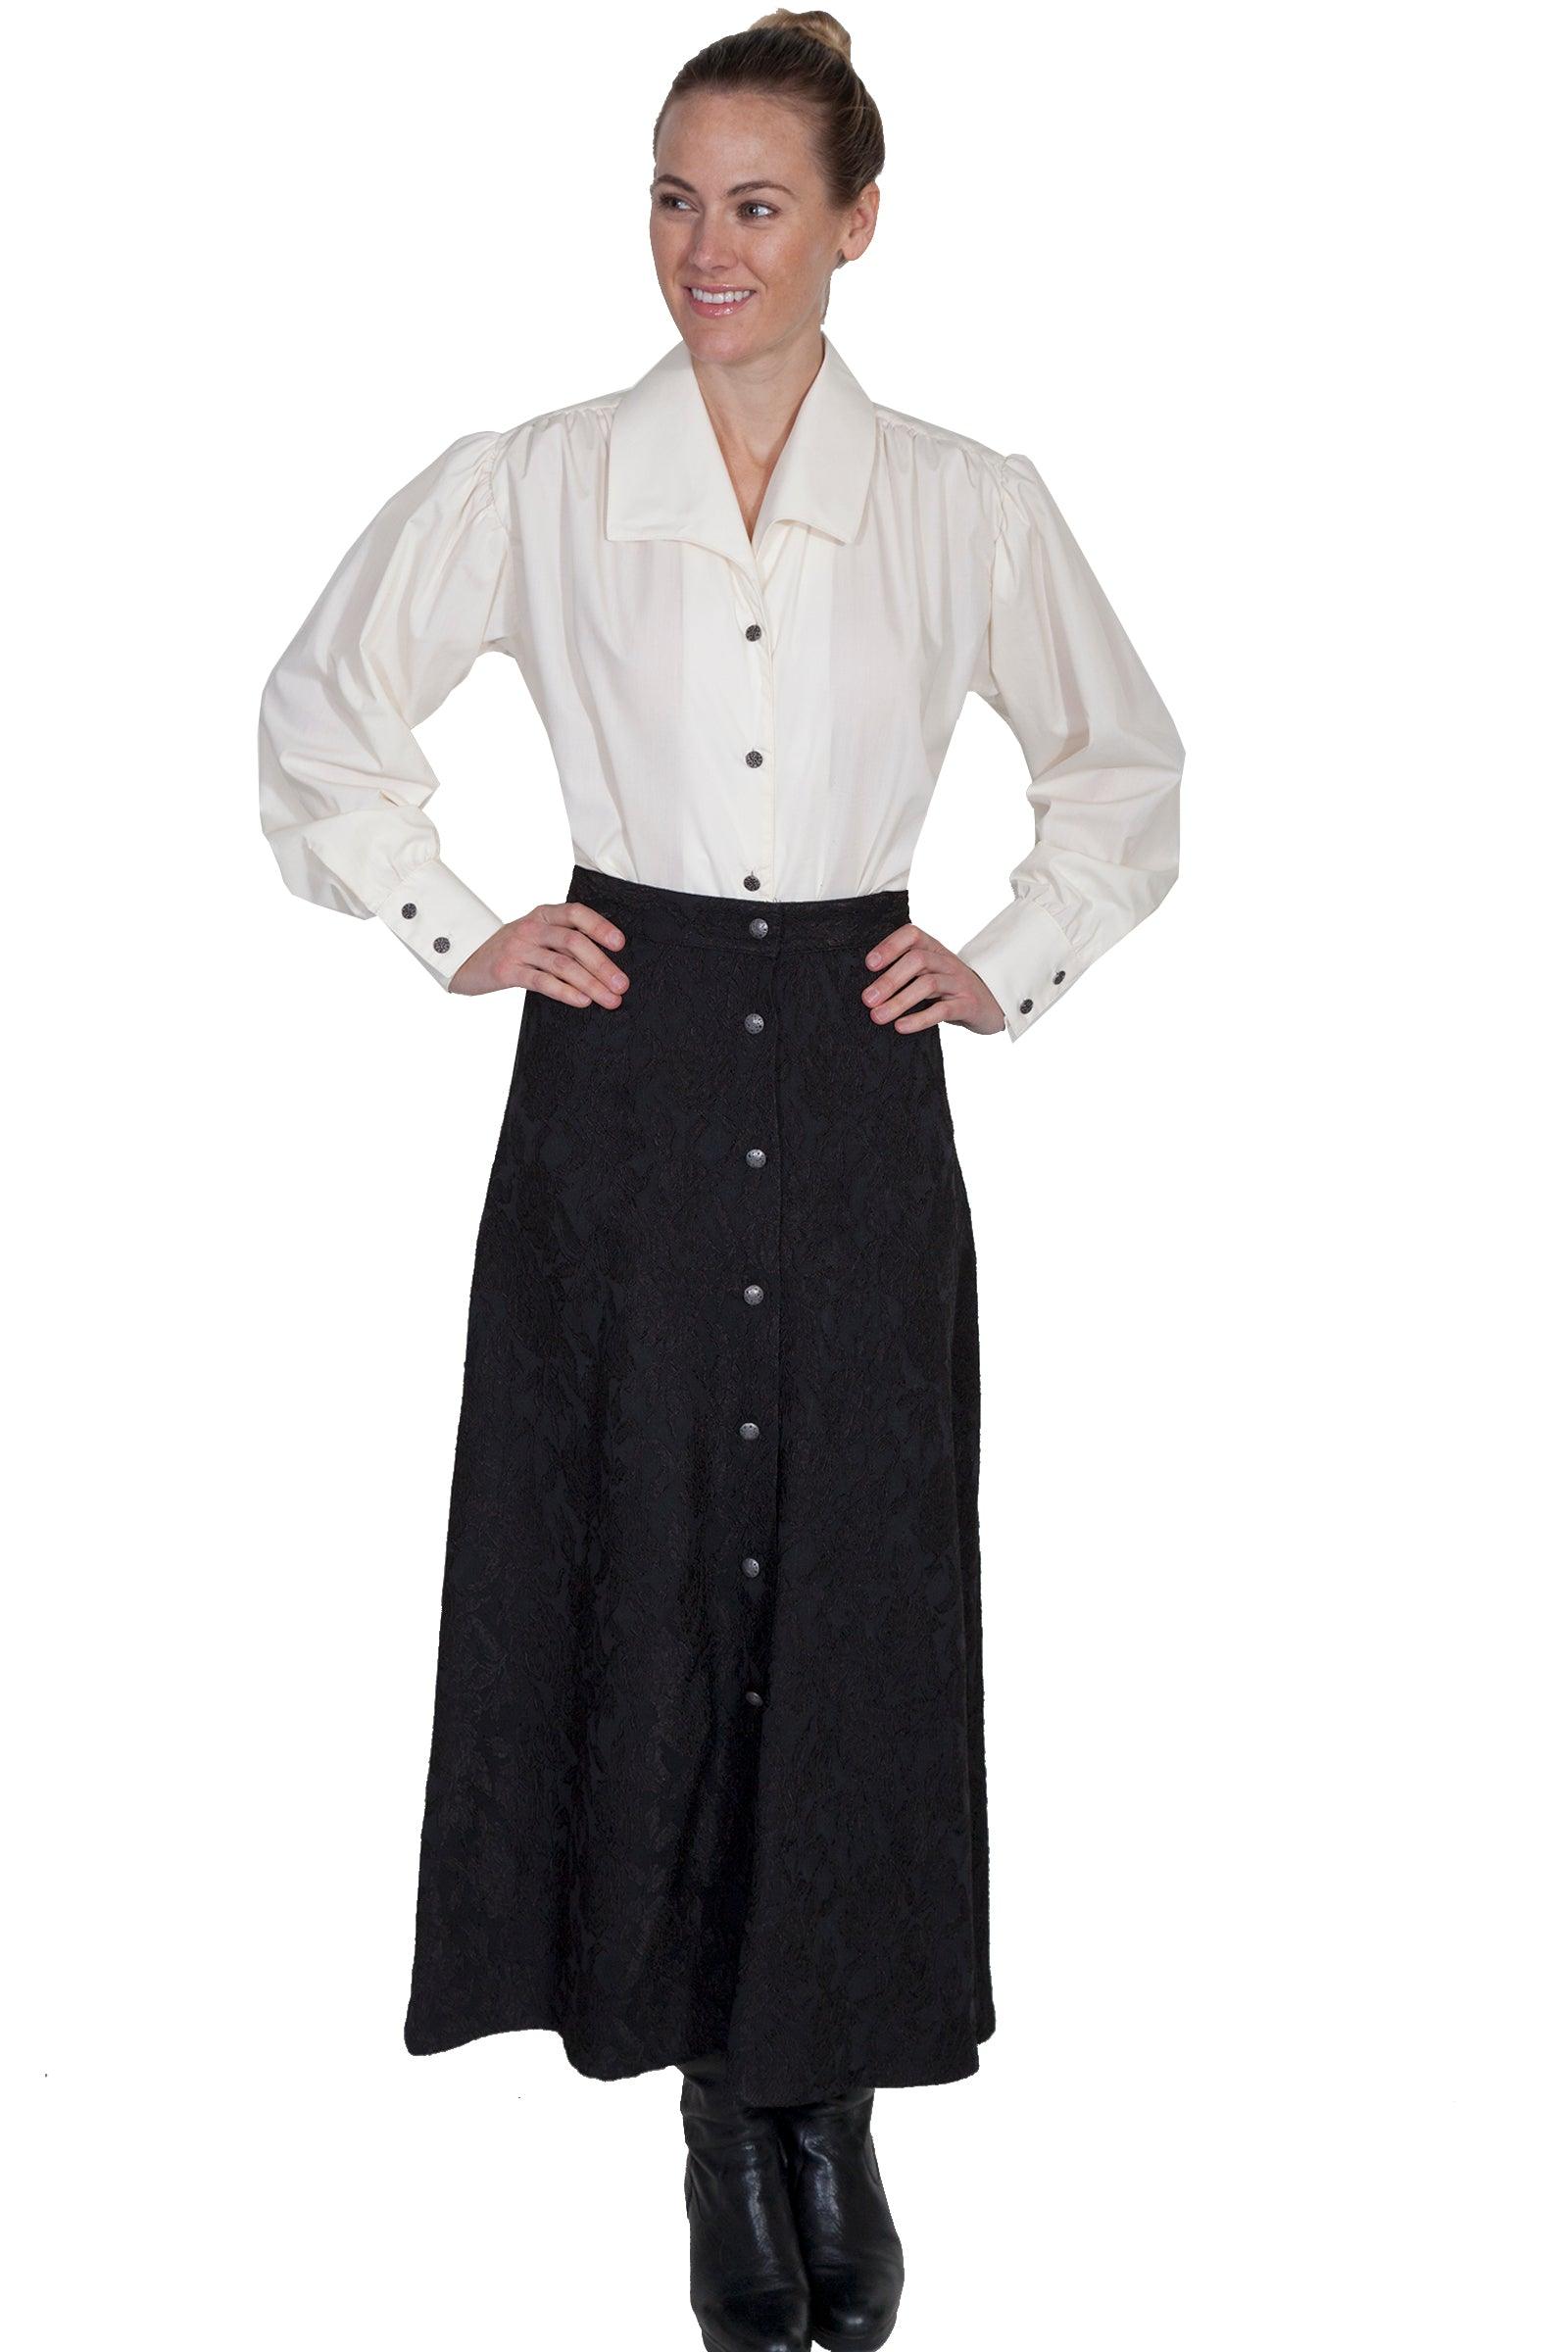 Scully BLACK BUTTON FRONT SKIRT - Flyclothing LLC